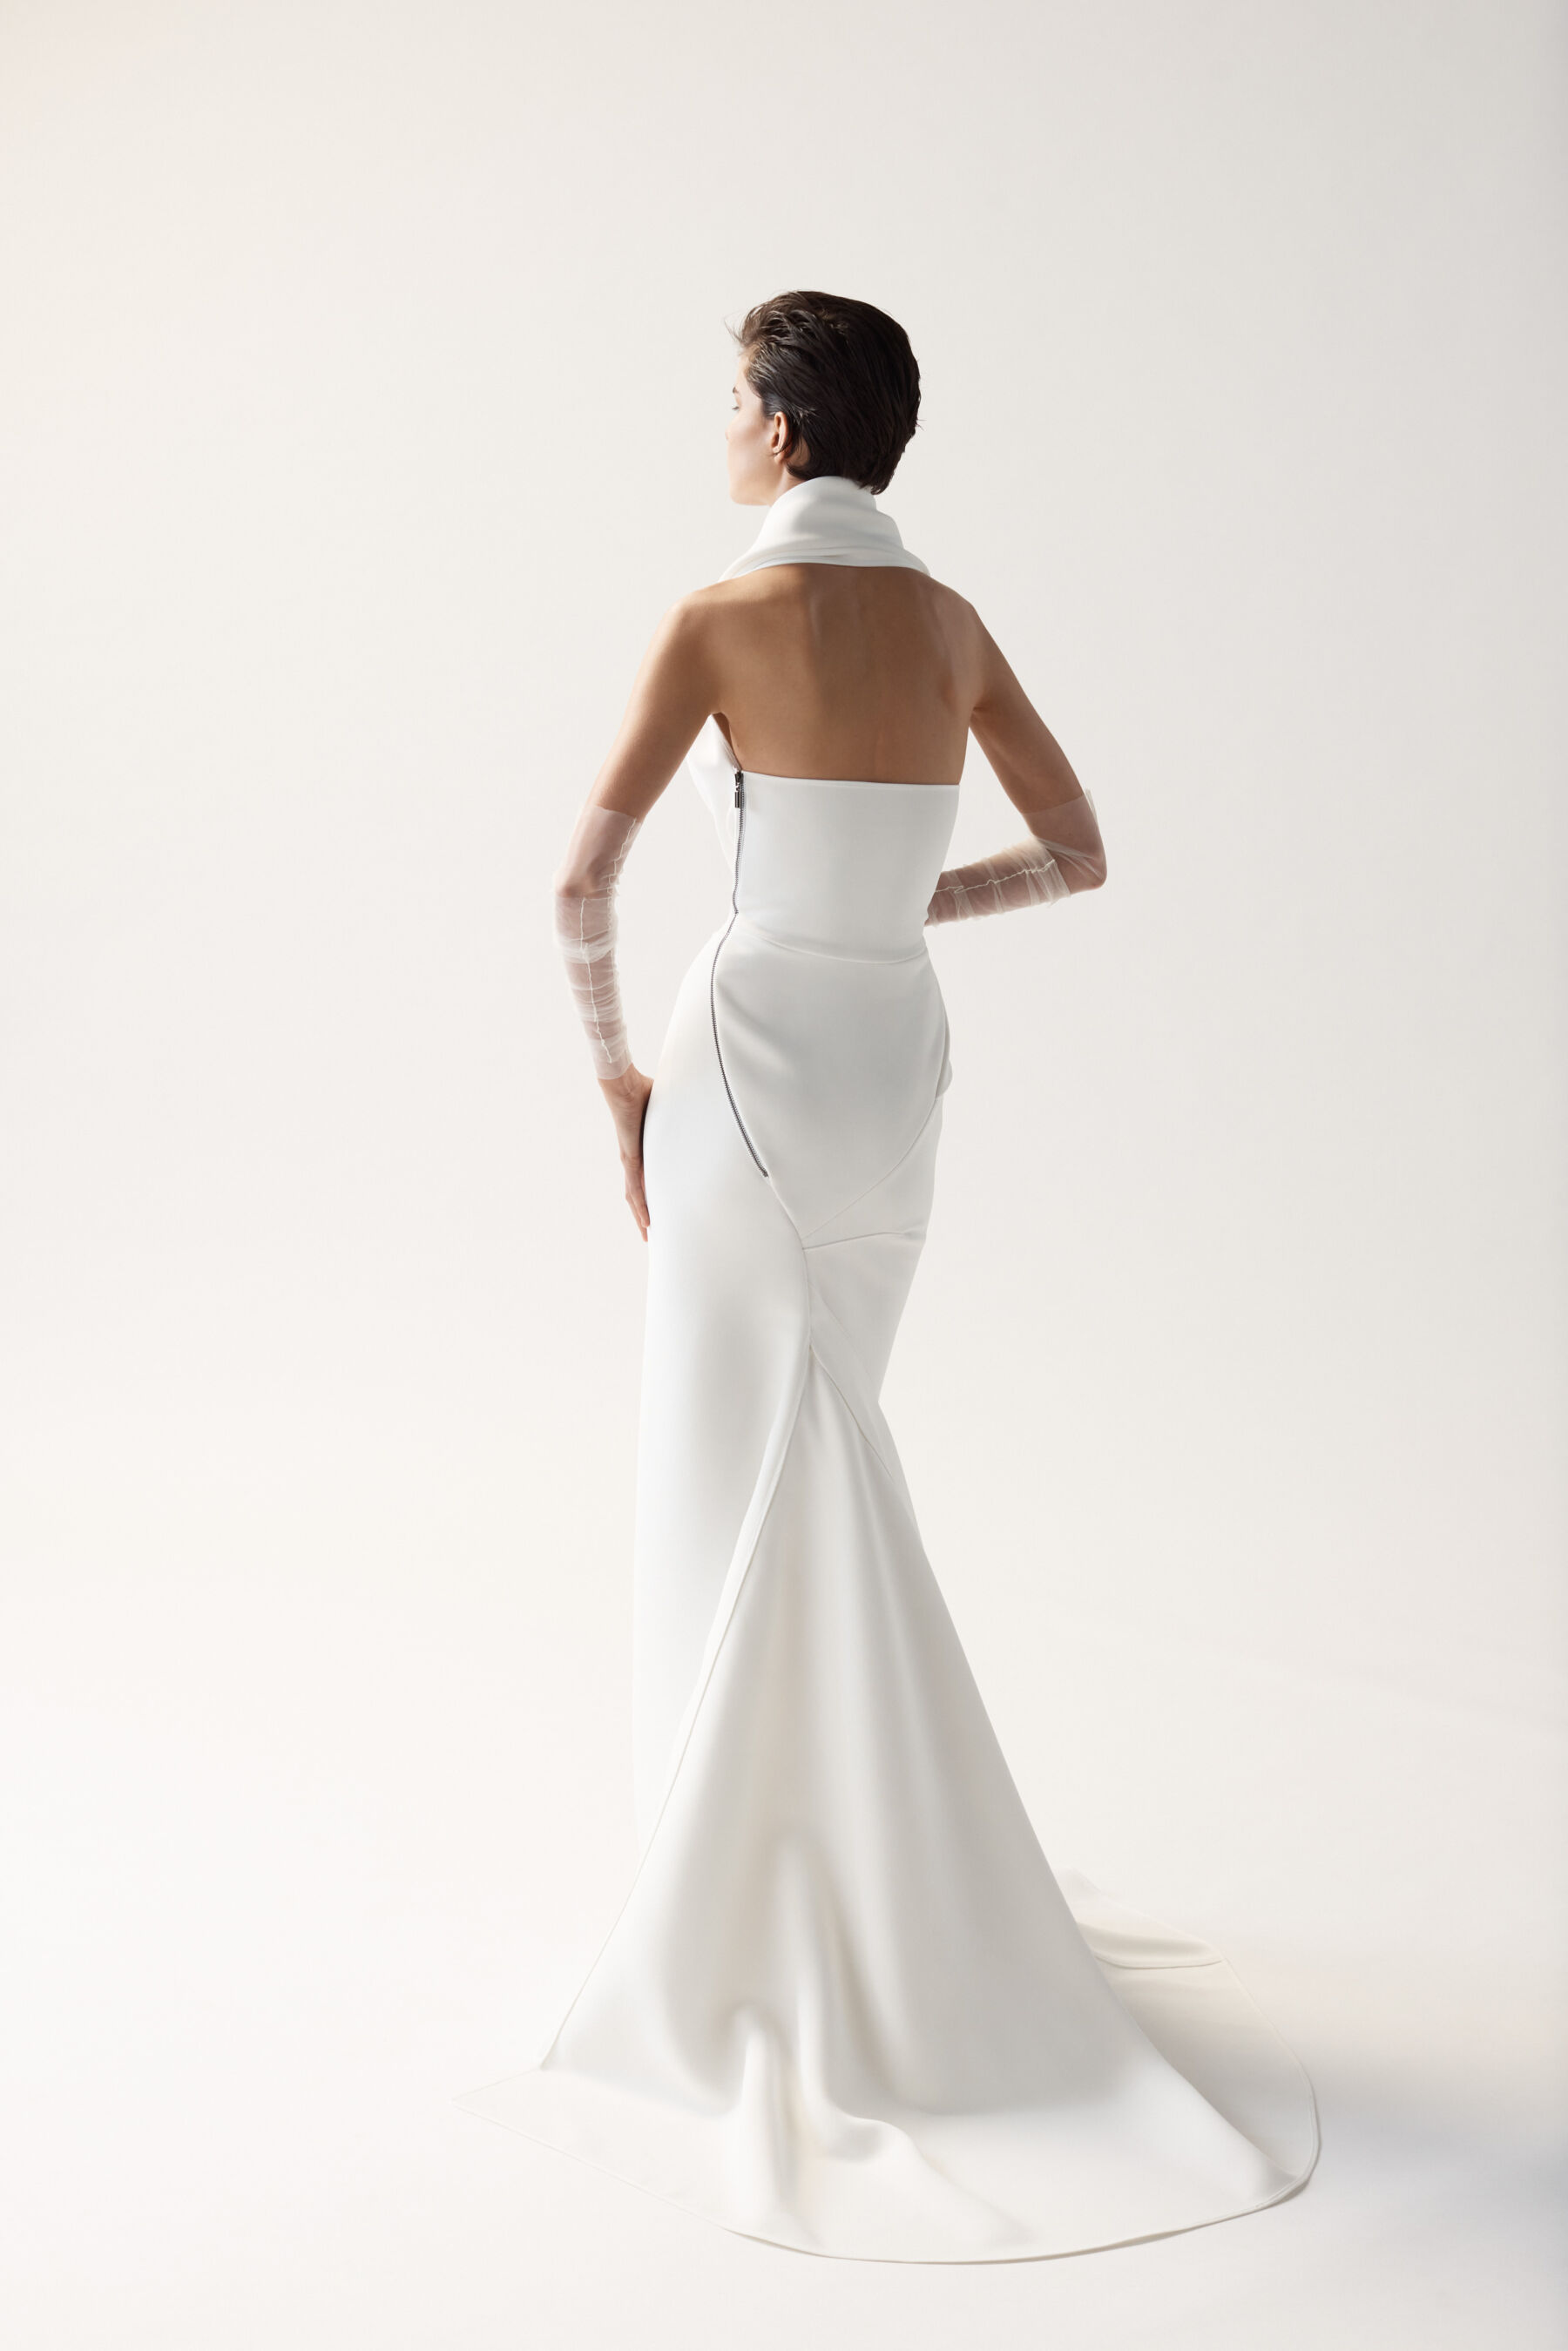 Allegro by Toni Maticevski, available at Miss Bush in Surrey, UK